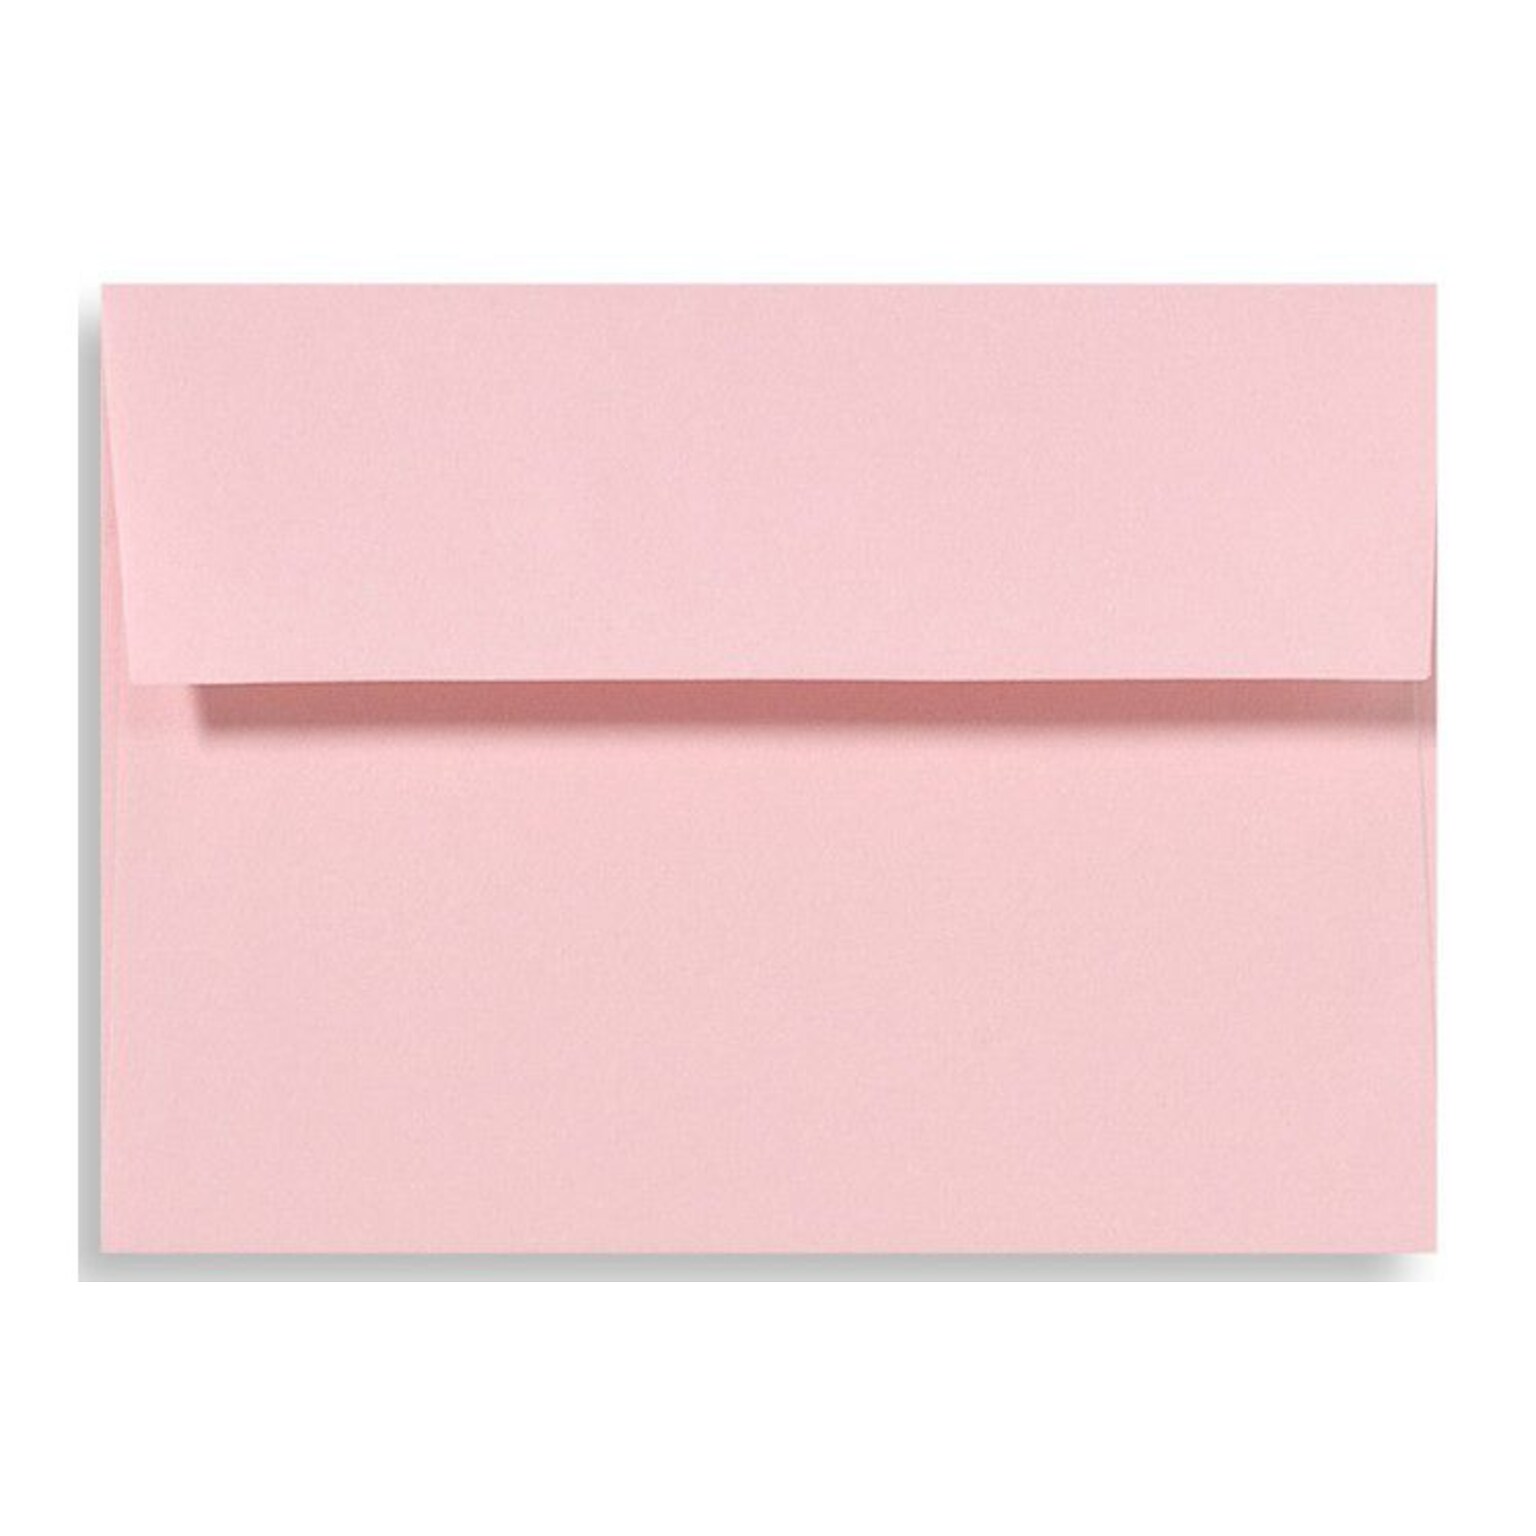 LUX 4 3/8 x 5 3/4 70lbs. A2 Invitation Envelopes W/Glue, Candy Pink, 50/Pack